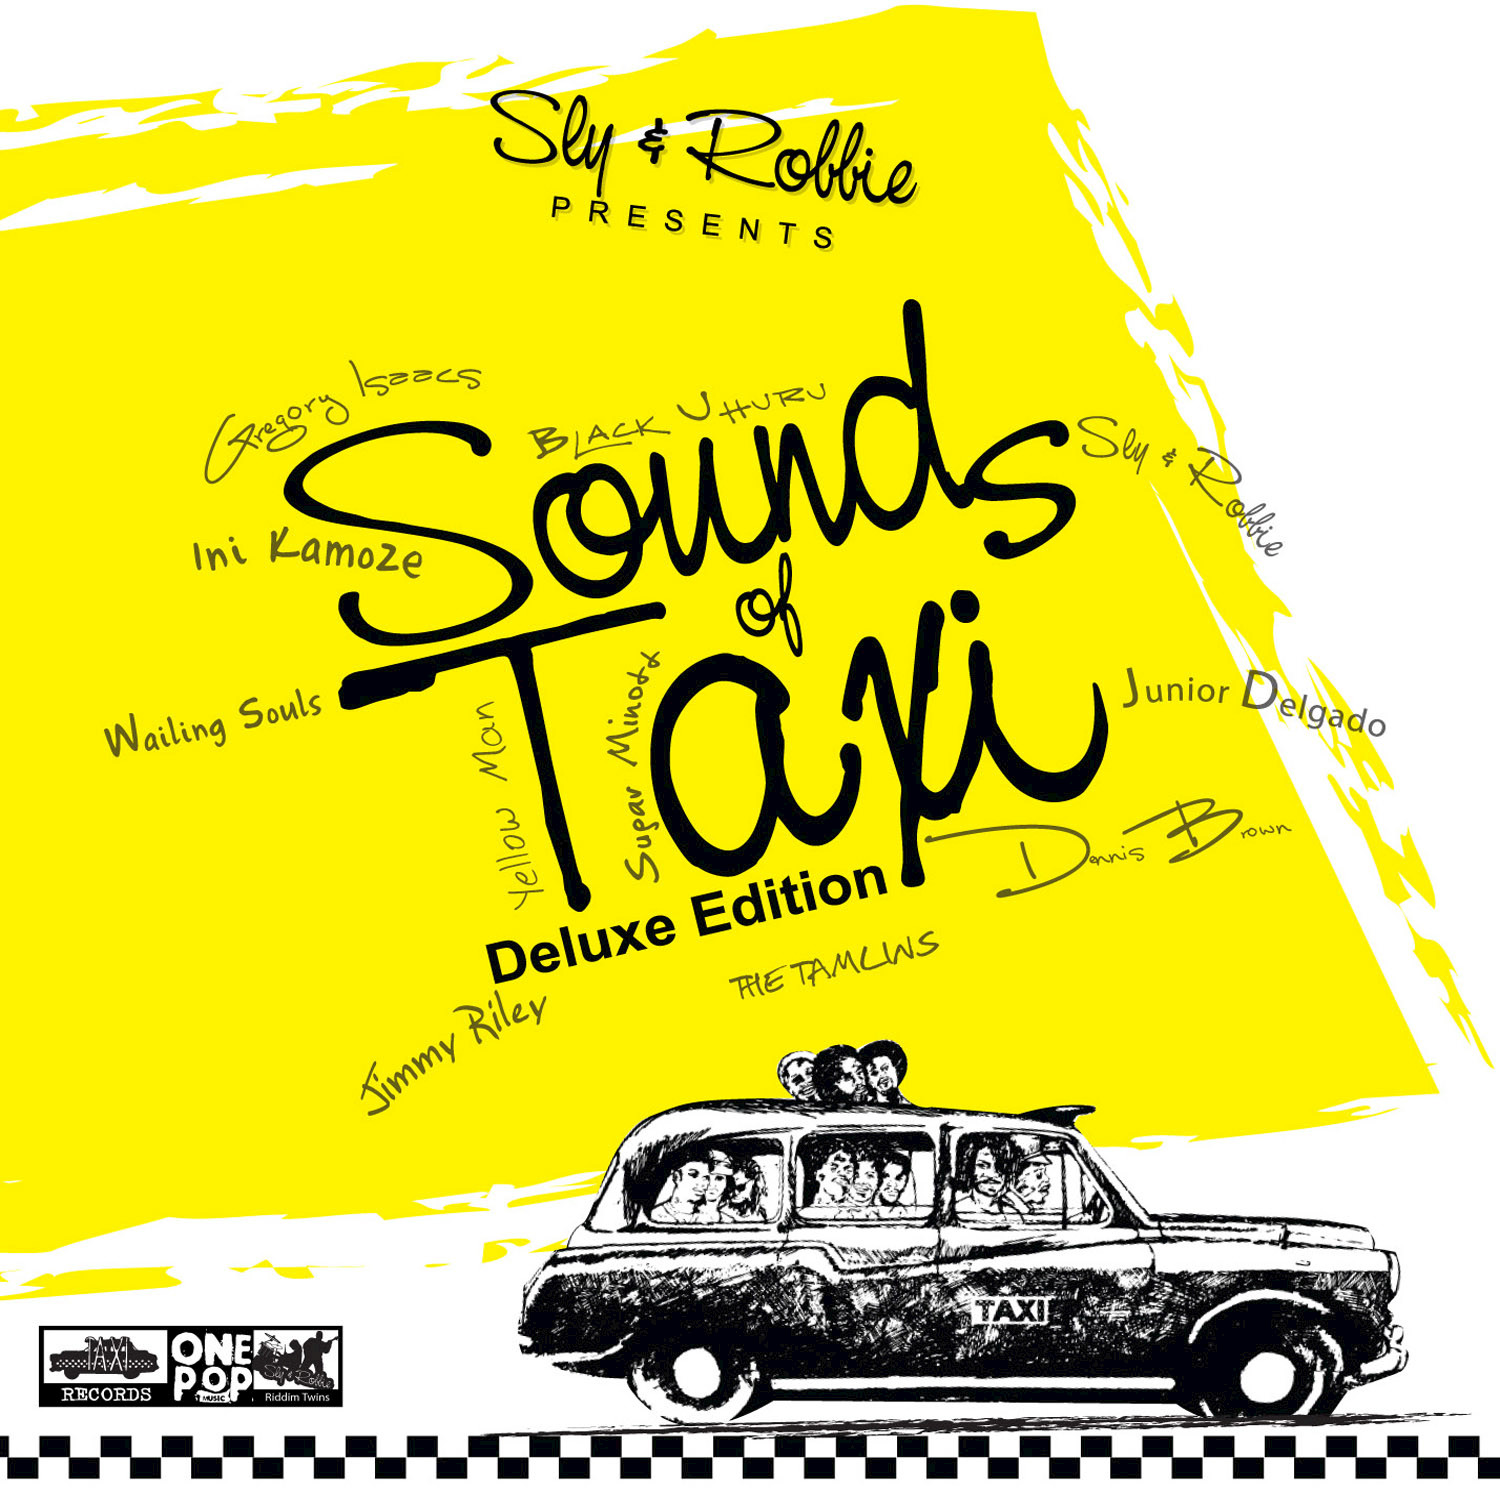 Sly & Robbie Presents Sounds of Taxi Deluxe Edition